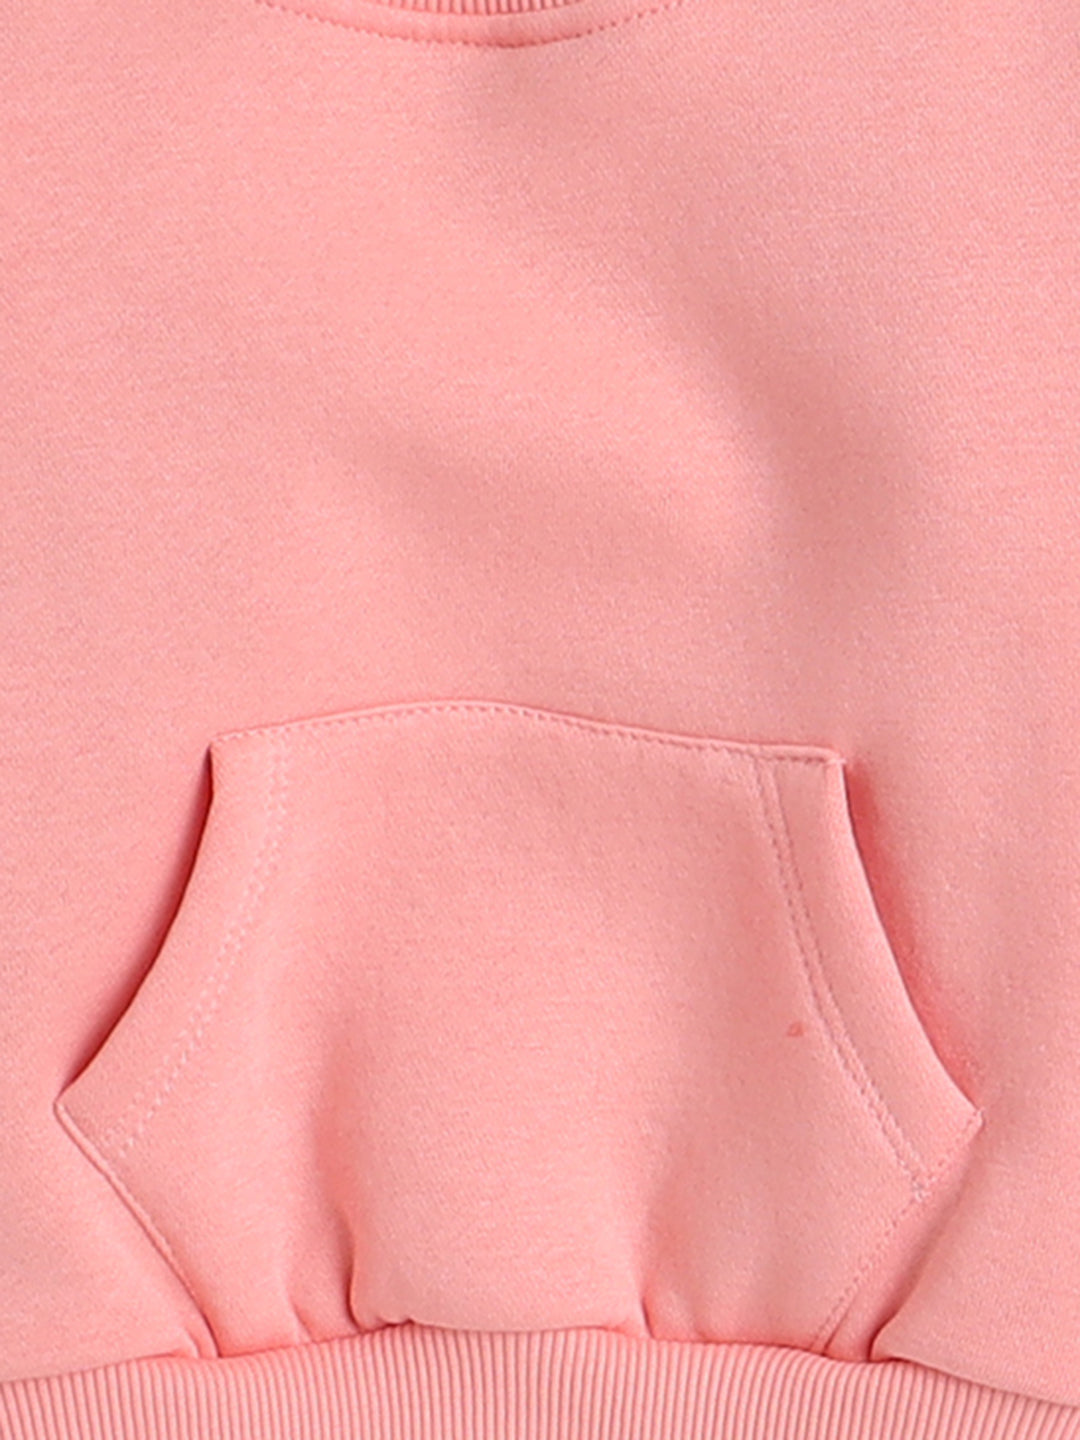 Knitting Doodles Kid's Sweatshirt with Warm Fleece and Pocket in front- Peach